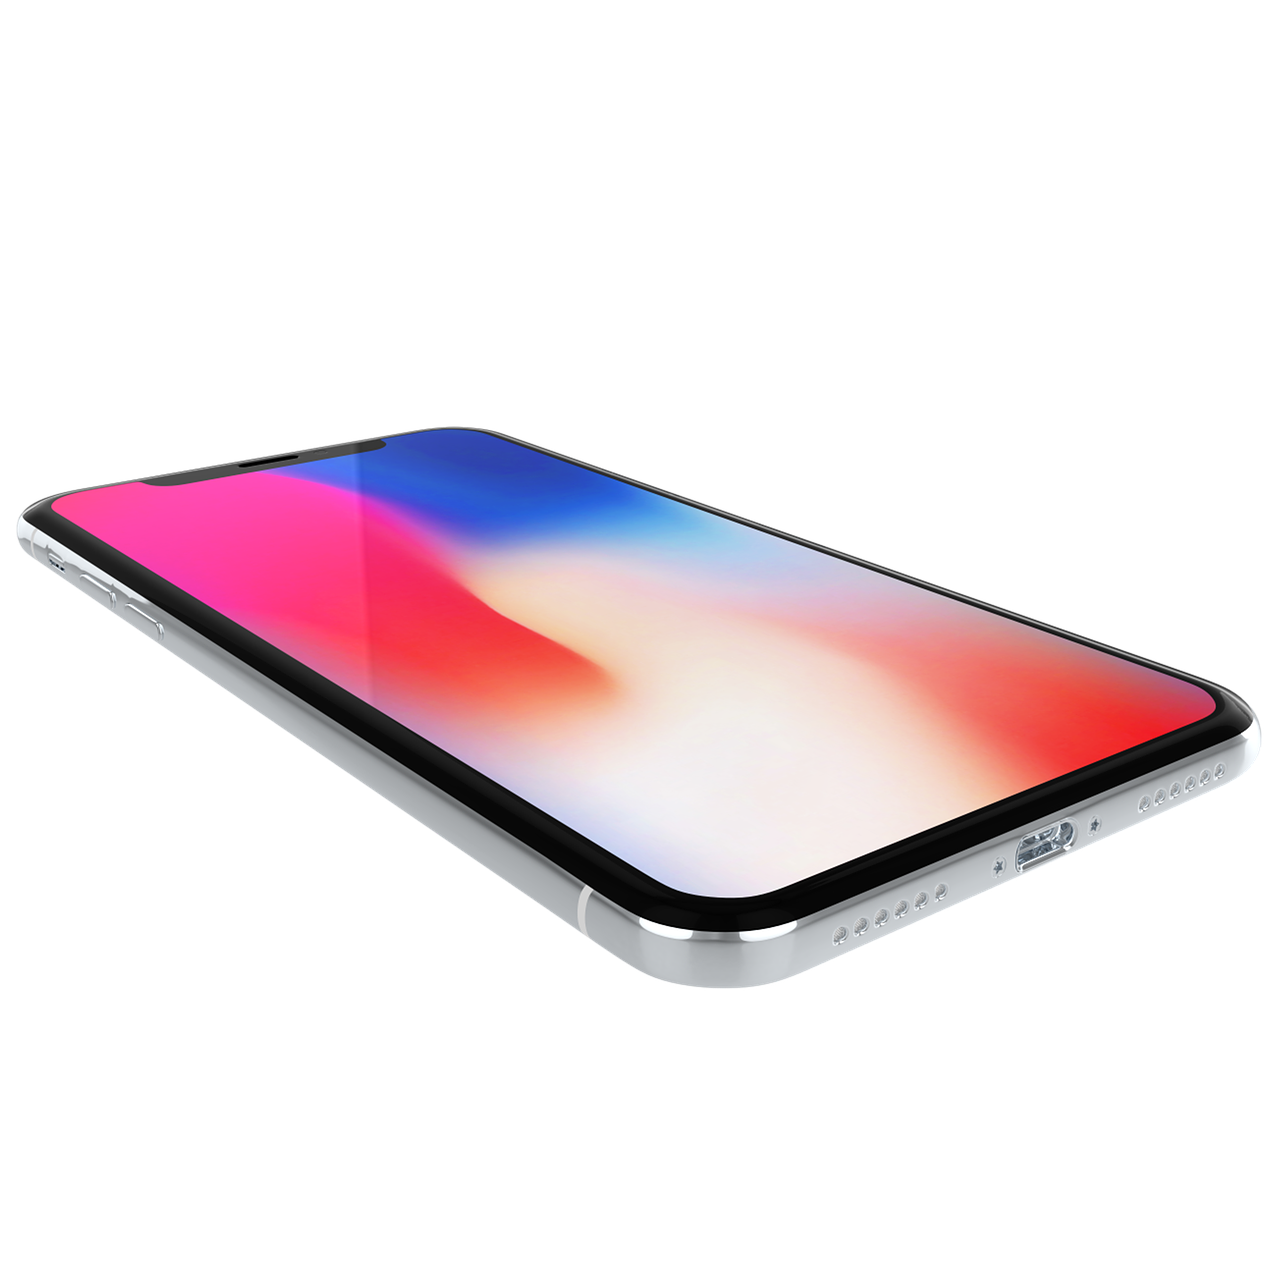 2018 Lcd Iphone - Iphone X Transparent Background , HD Wallpaper & Backgrounds